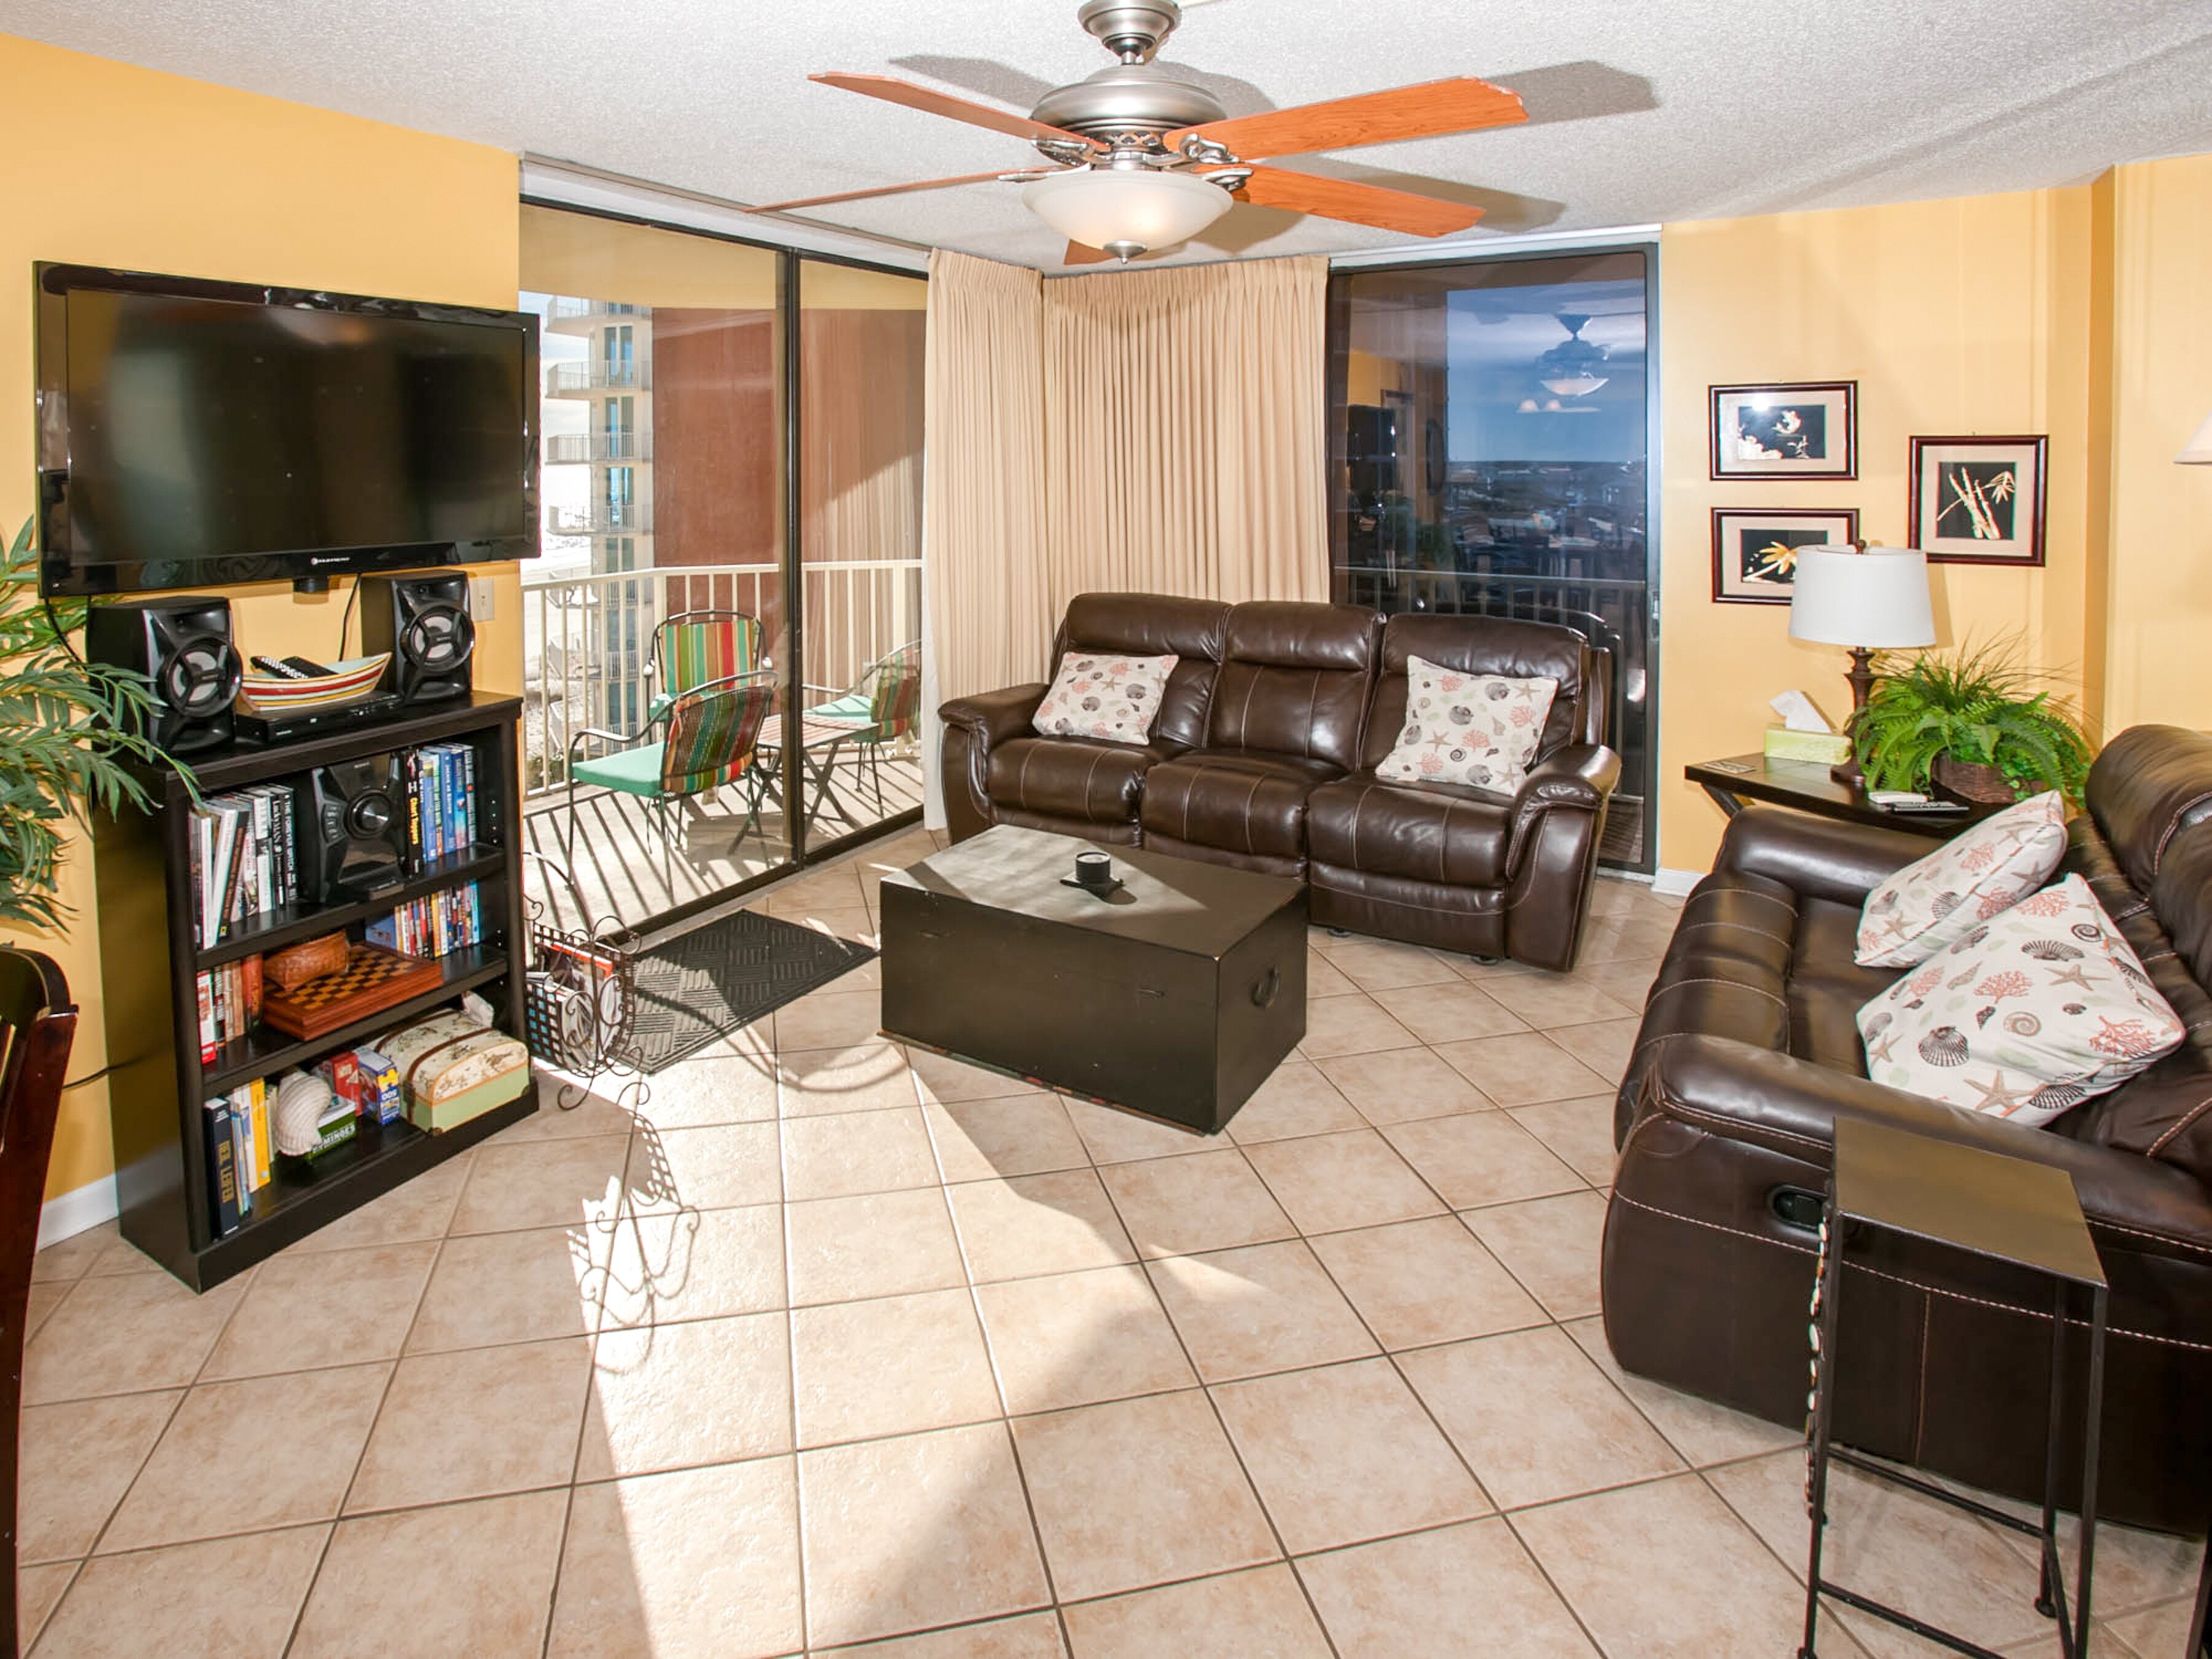 In the main living area, enjoy the 40" flat screen TV with a DVD player. Complimentary Wi-Fi provided.